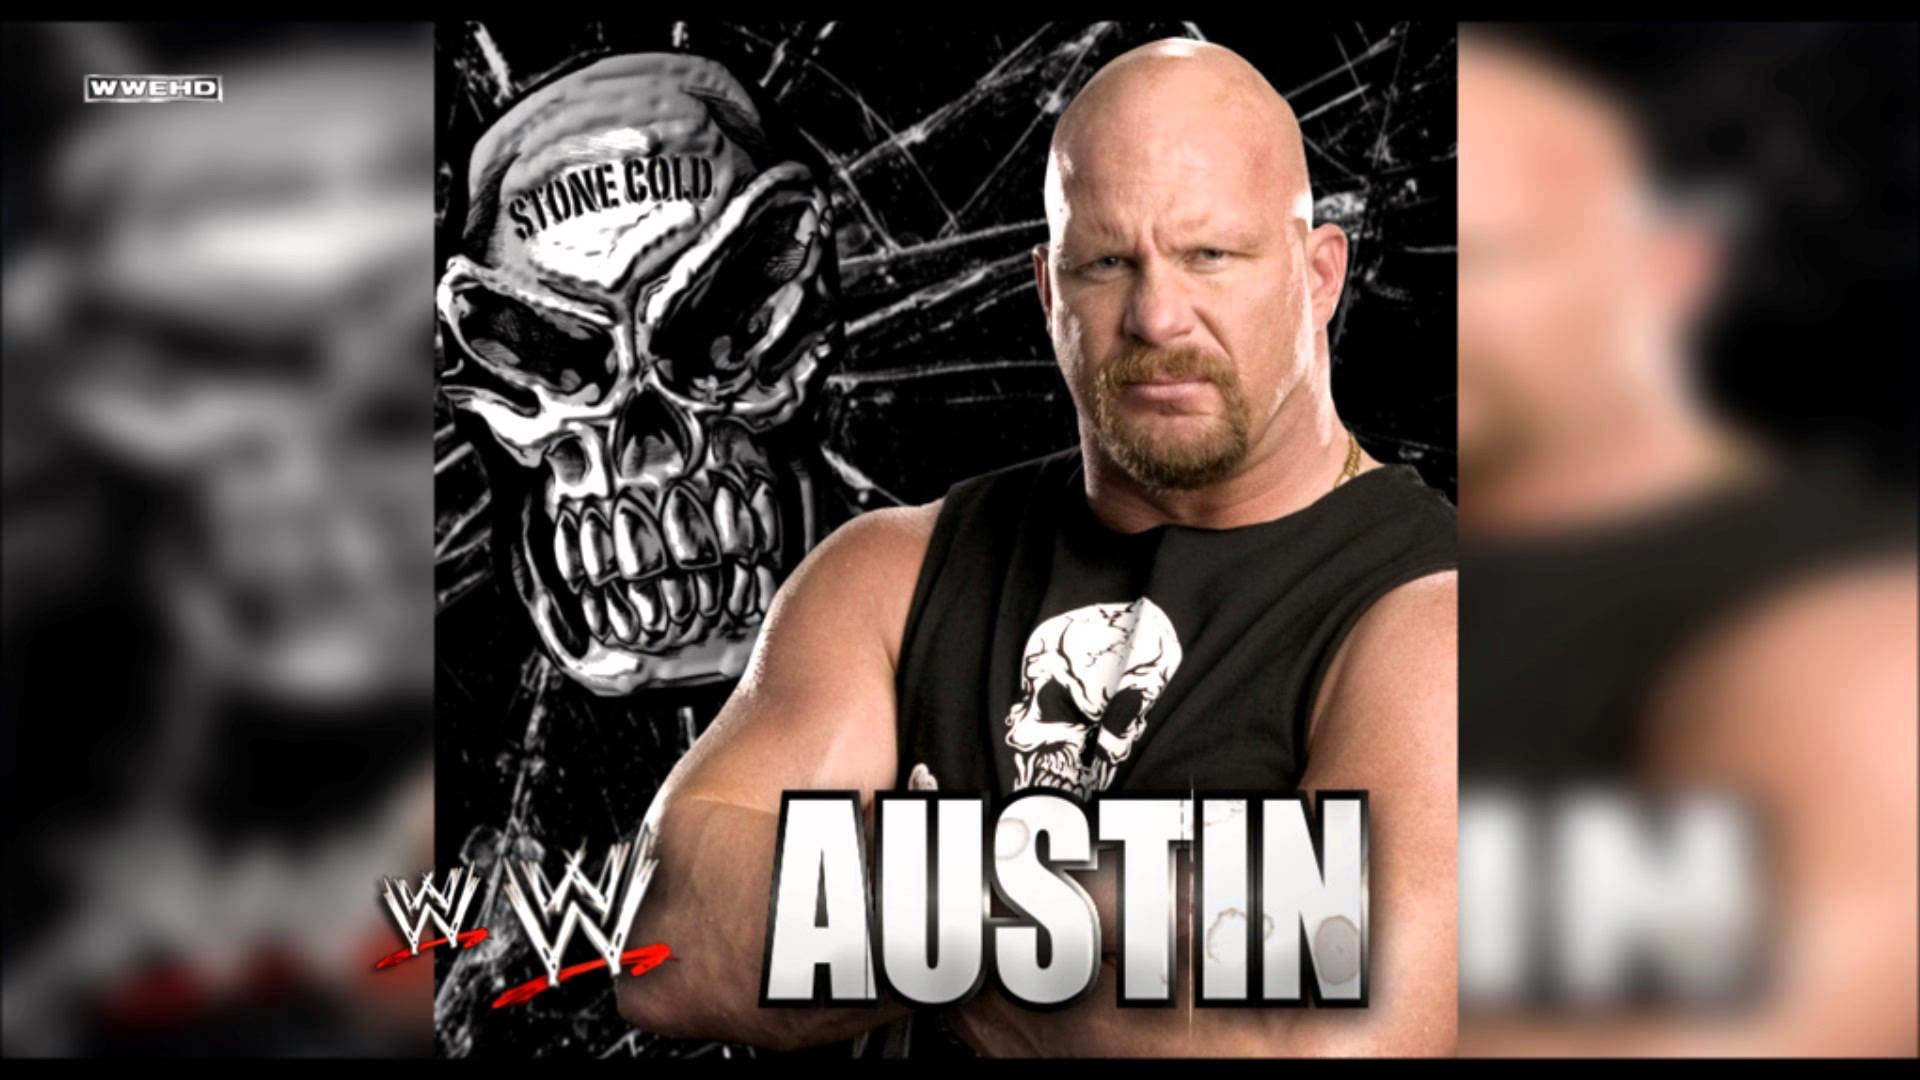 1920x1080 WWE: "I Won't Do What You Tell Me" (Stone Cold Steve Austin) Theme Song +  AE (Arena Effect) - YouTube